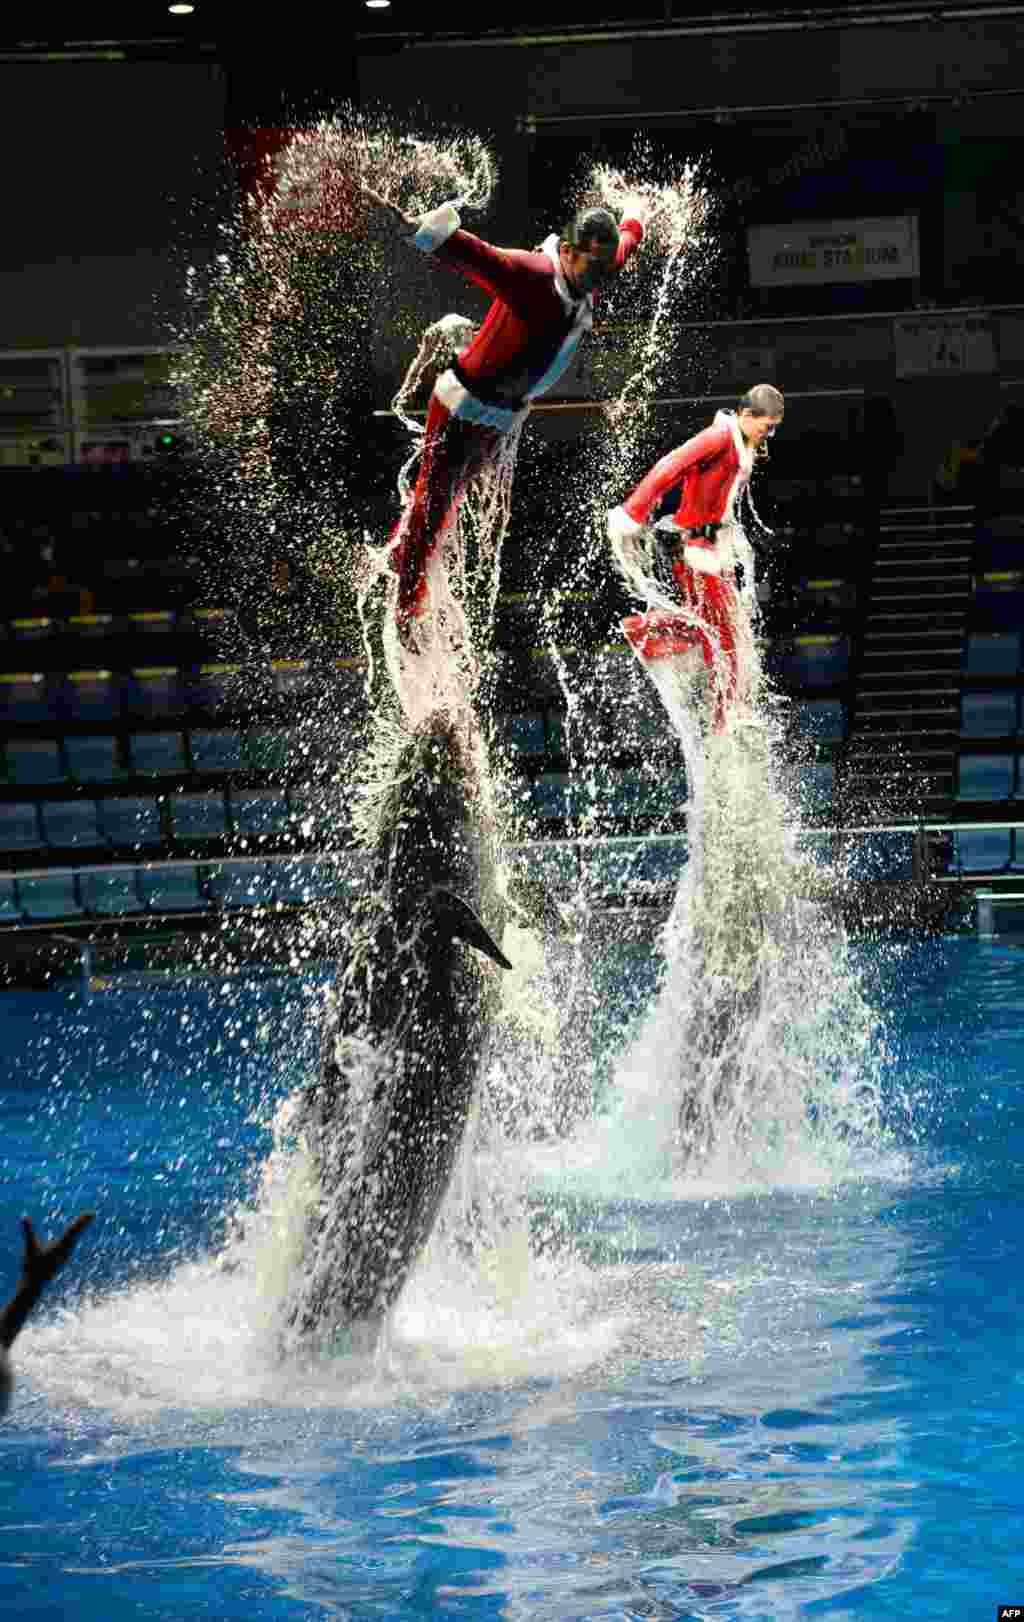 Trainers wearing Santa Claus costumes perform with a bottle-nose dolphin (R) and a fake killer whale (L) during a show at the Aqua Stadium aquarium in Tokyo, Japan.